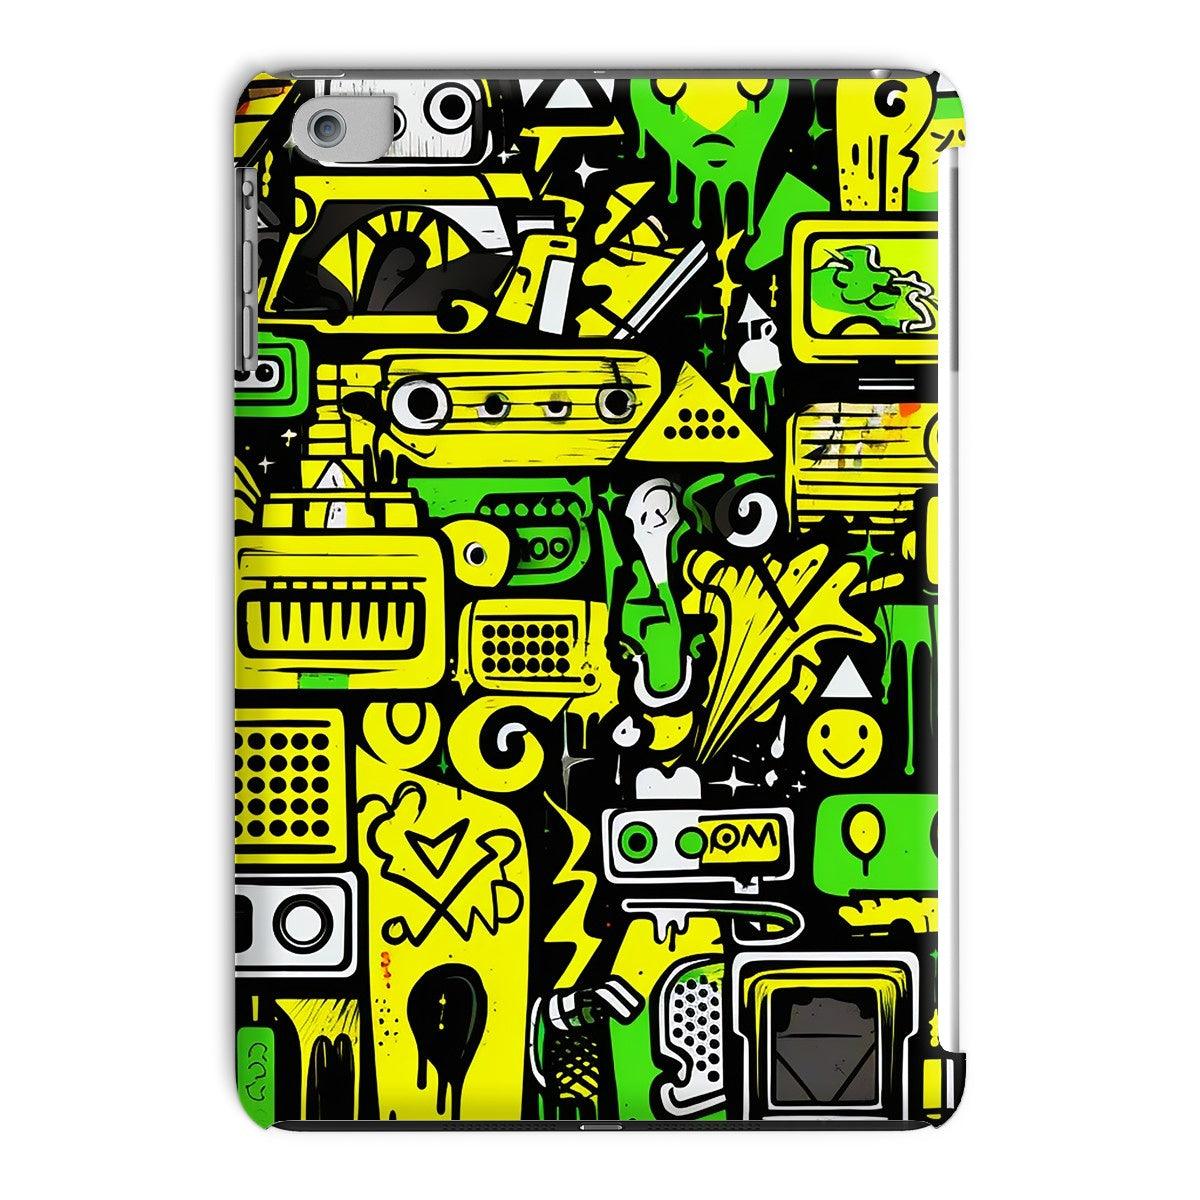 Graffiti Green and Yellow Abstract: A Dive into Vibrant Urban Art Tablet Cases - D'Sare 